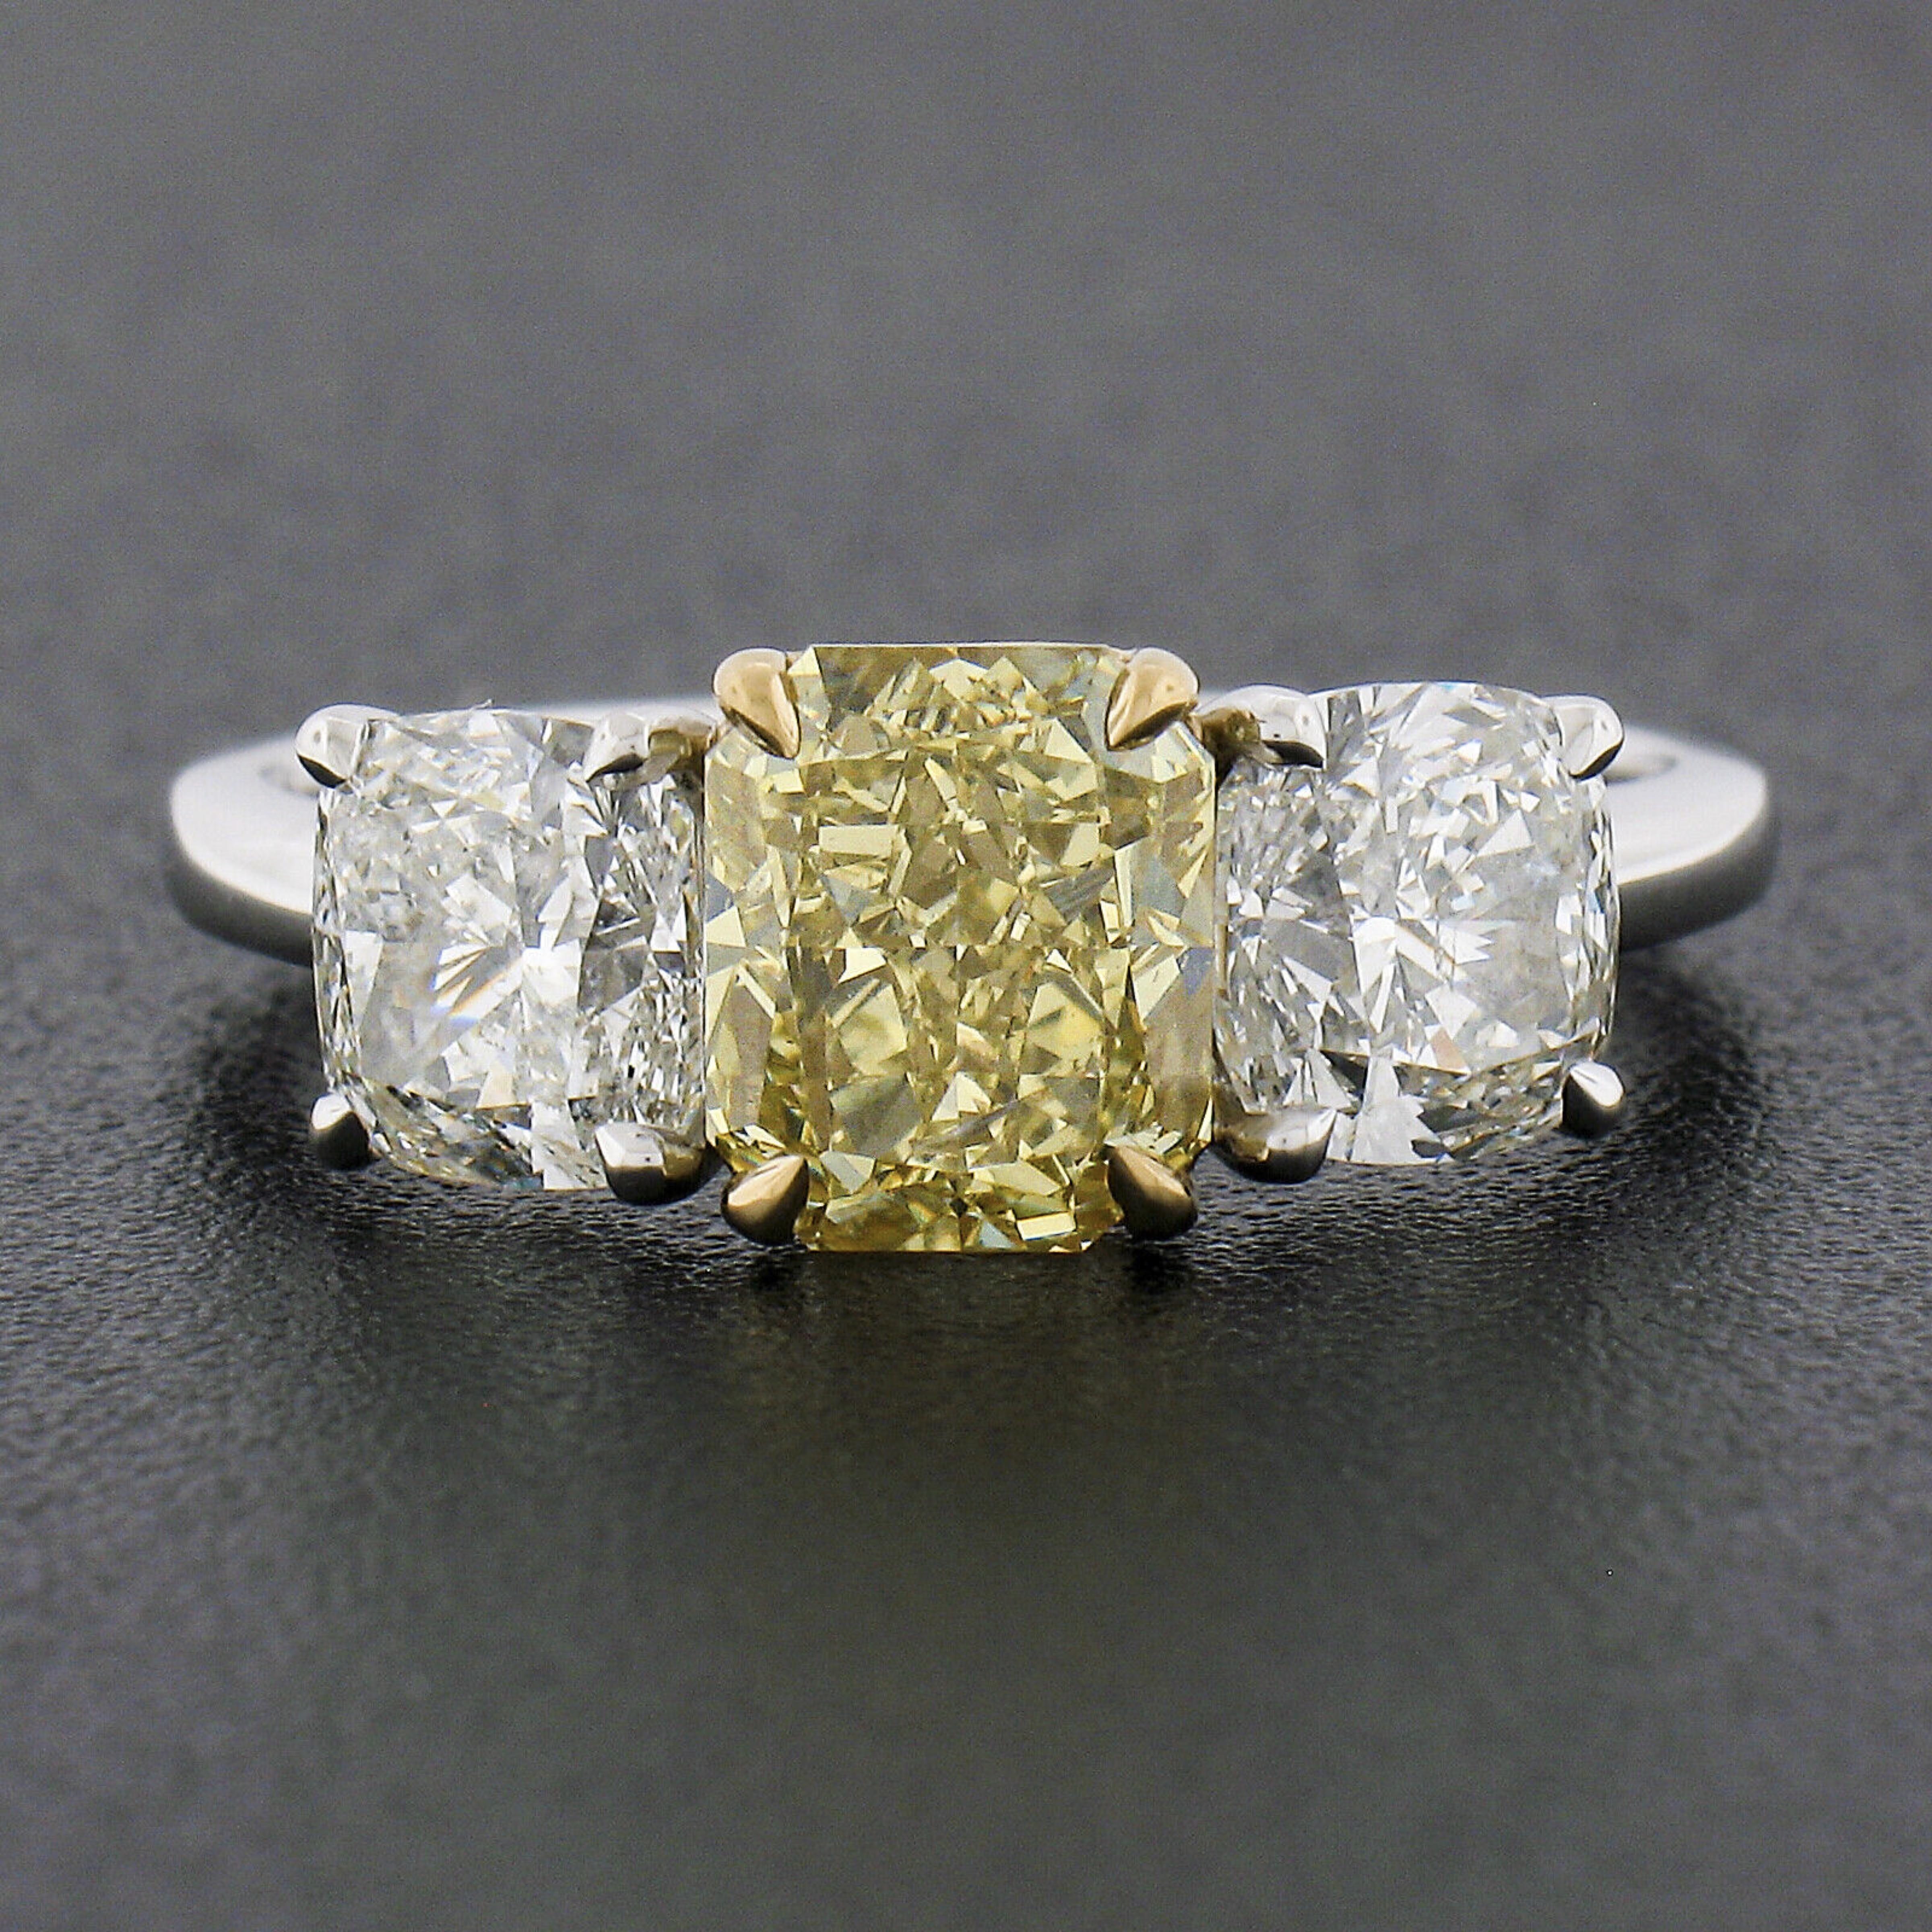 You are looking at a truly breathtaking engagement ring that is newly crafted from solid platinum with an 18k yellow gold center basket that carries a stunning, GIA certified, fancy yellow diamond. This gorgeous elongated radiant cut center diamond